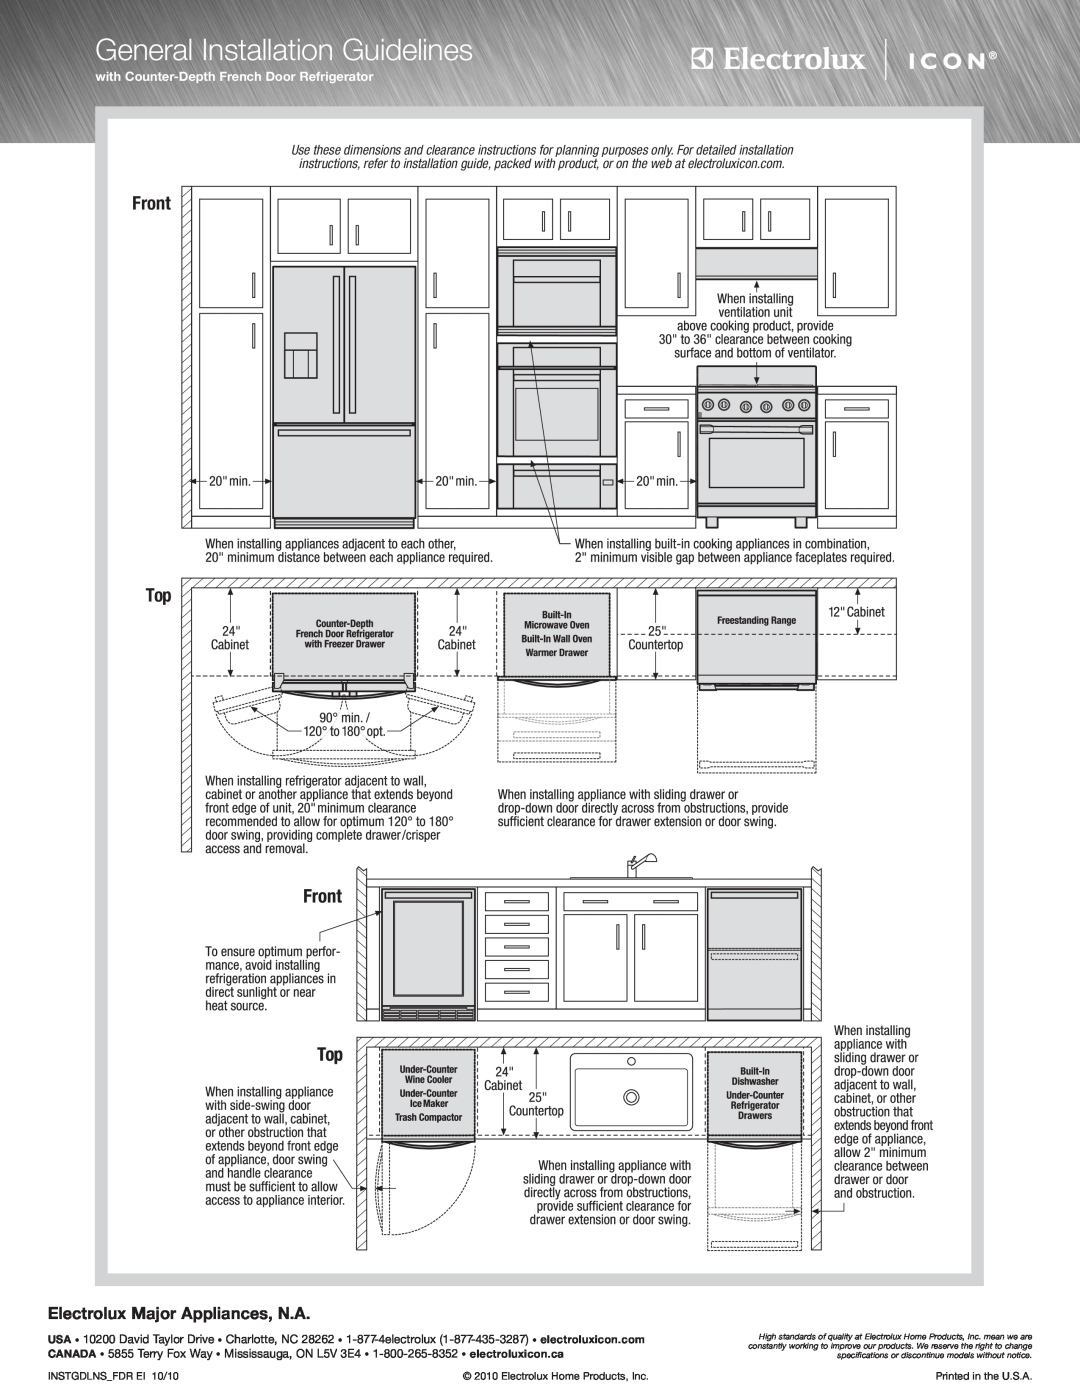 Electrolux E15IM60GPS specifications General Installation Guidelines, Front, Electrolux Major Appliances, N.A 